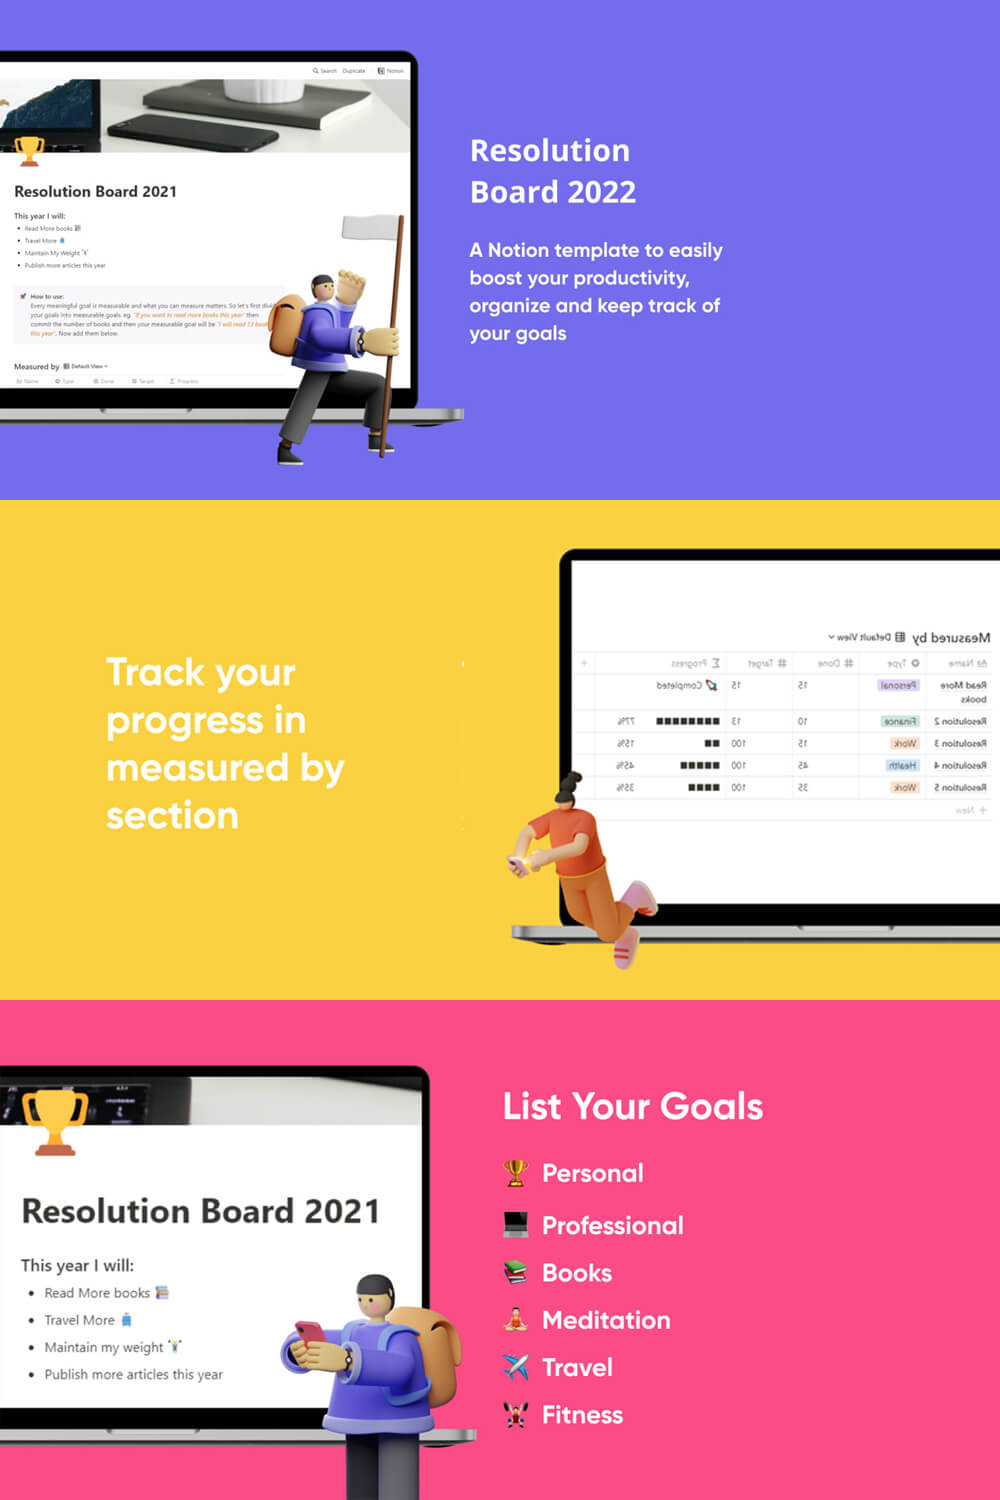 Resolution Board 2022 on the blue, yellow and pink backgrounds.